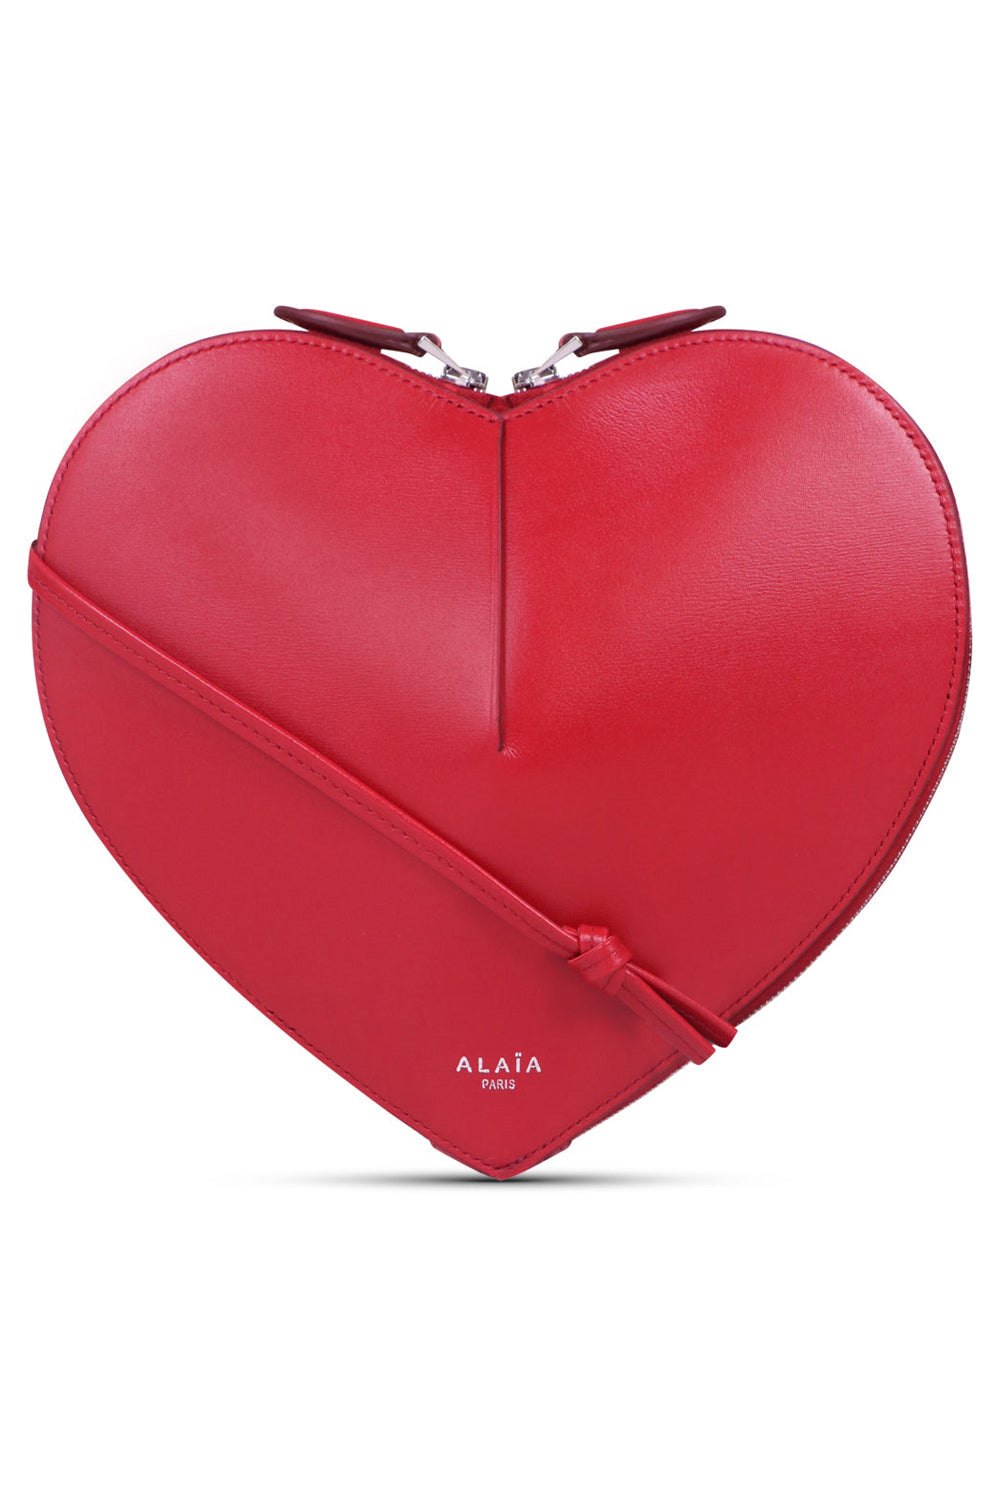 ALAIA BAGS RED / 331 - LAQUE / ONE SIZE Le Coeur Heart Shape Calfskin Bag | Red